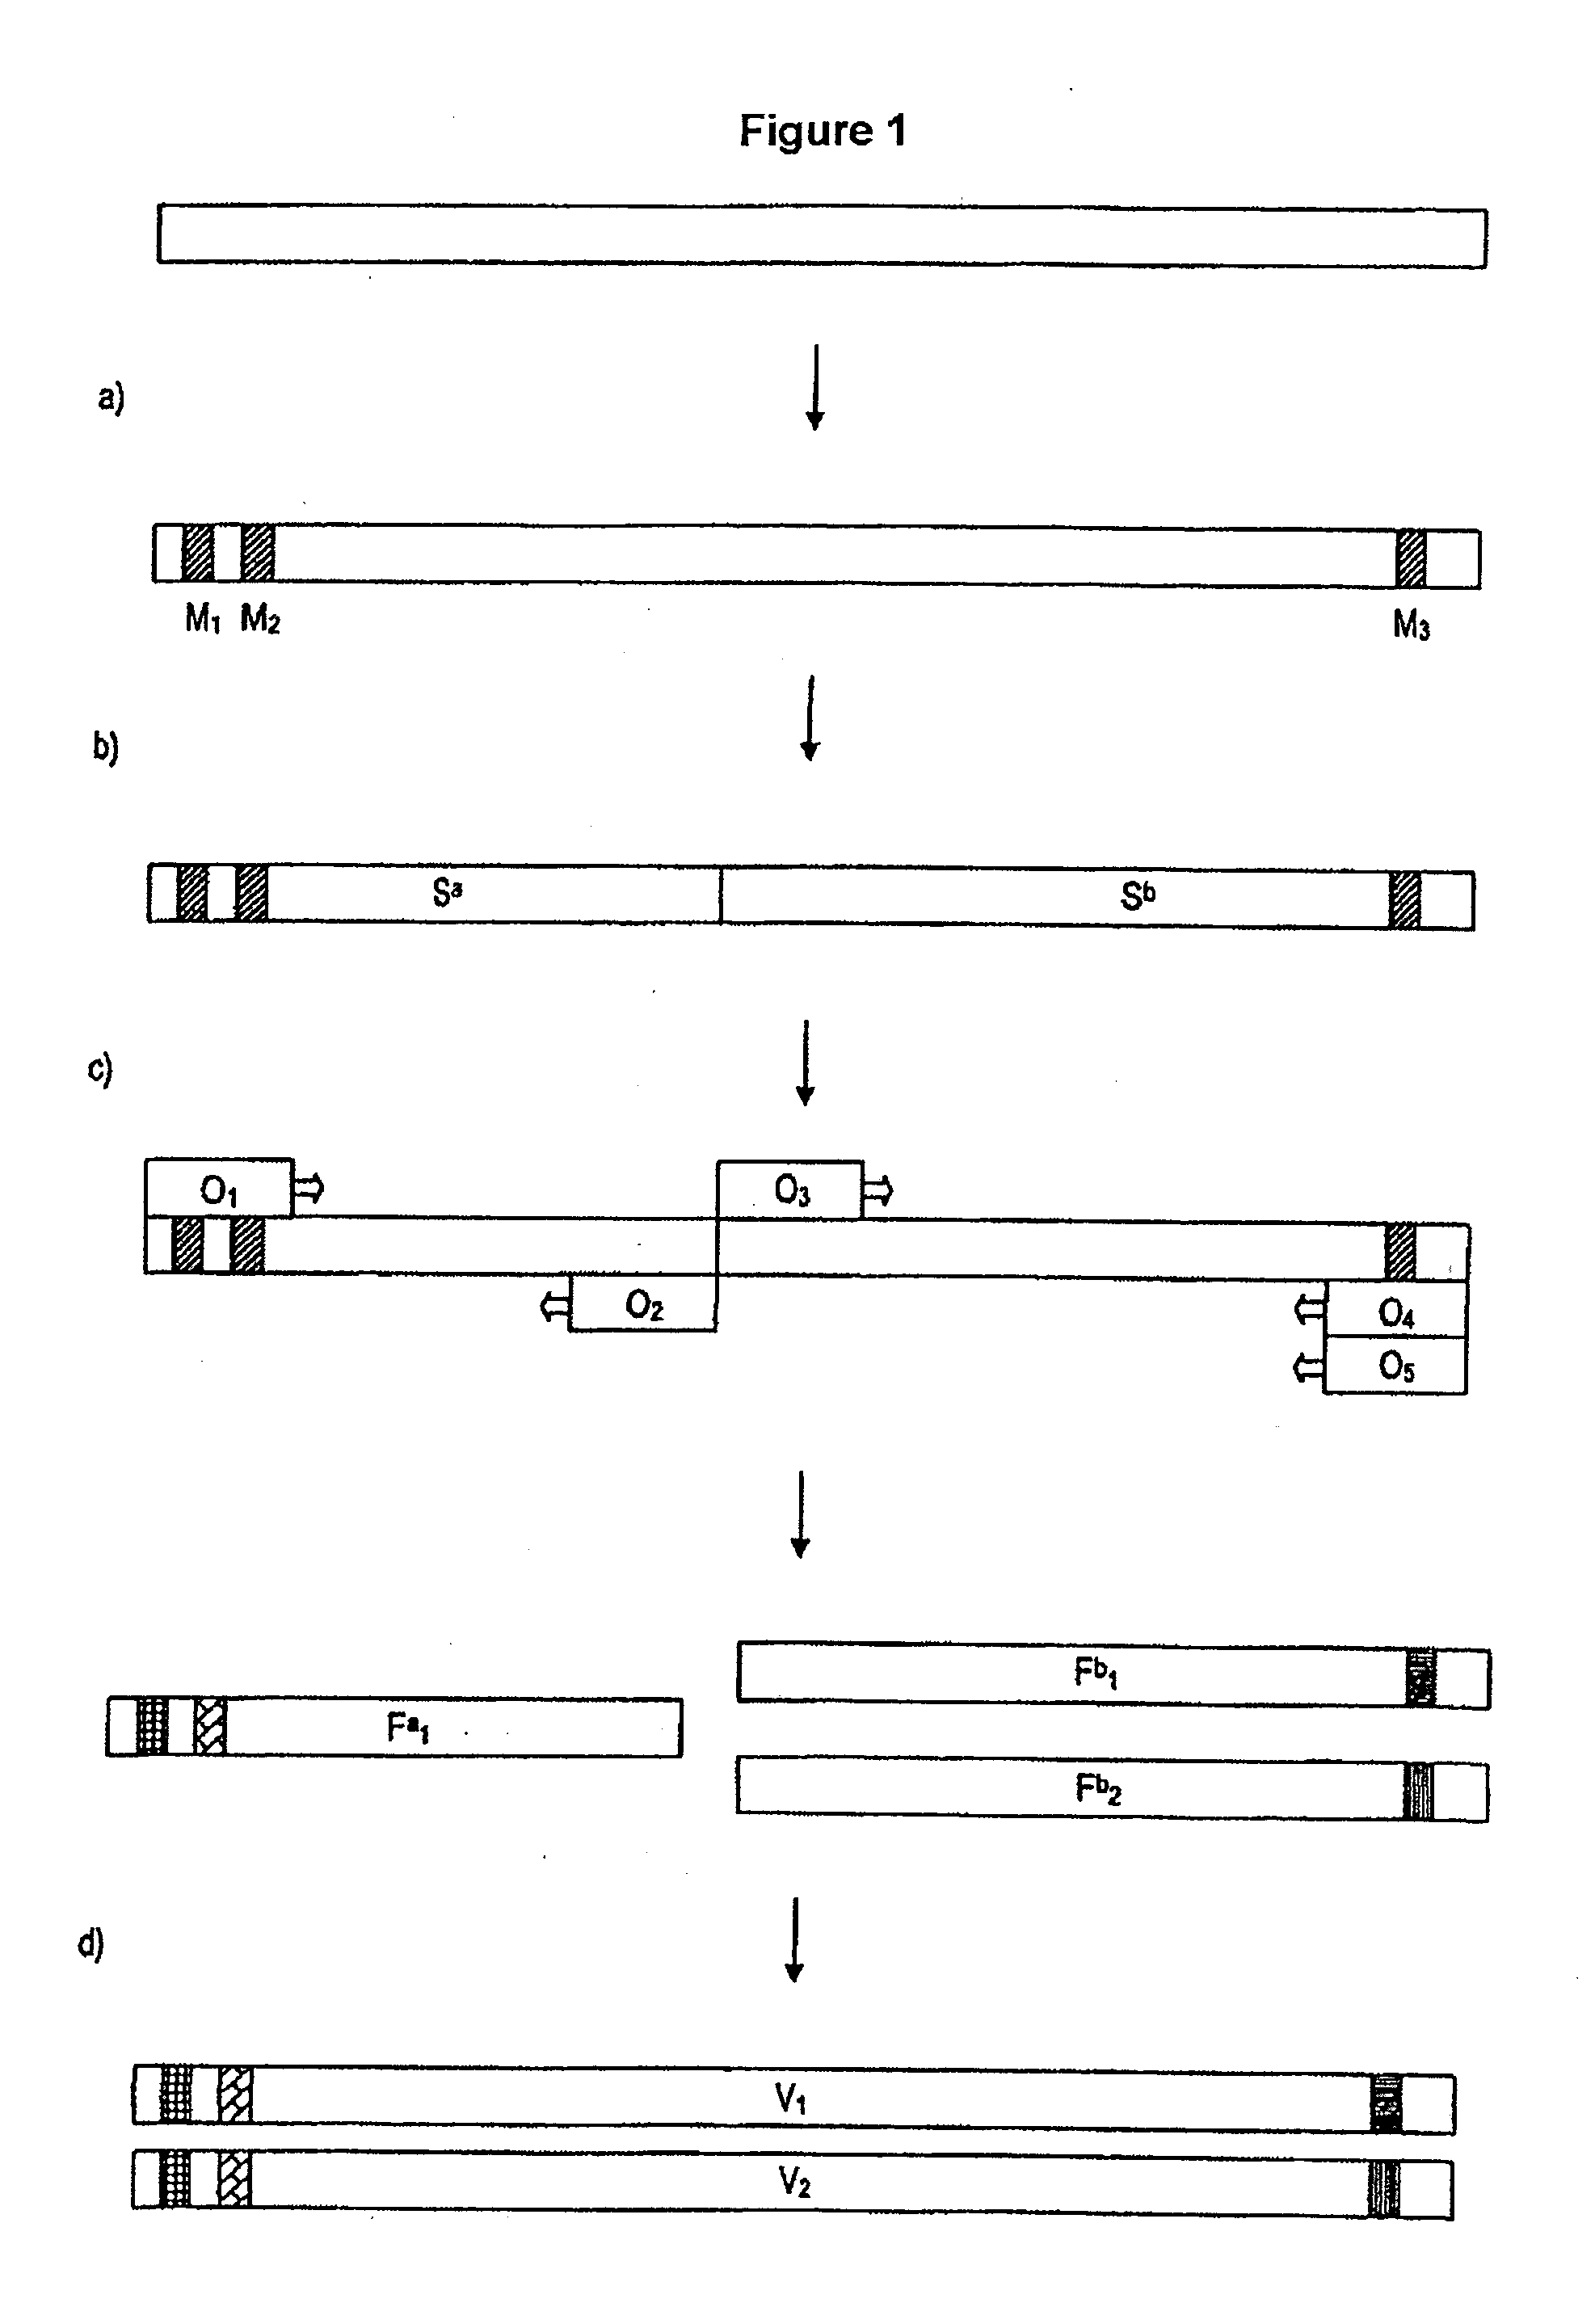 Process for Generating a Variant Library of DNA Sequences